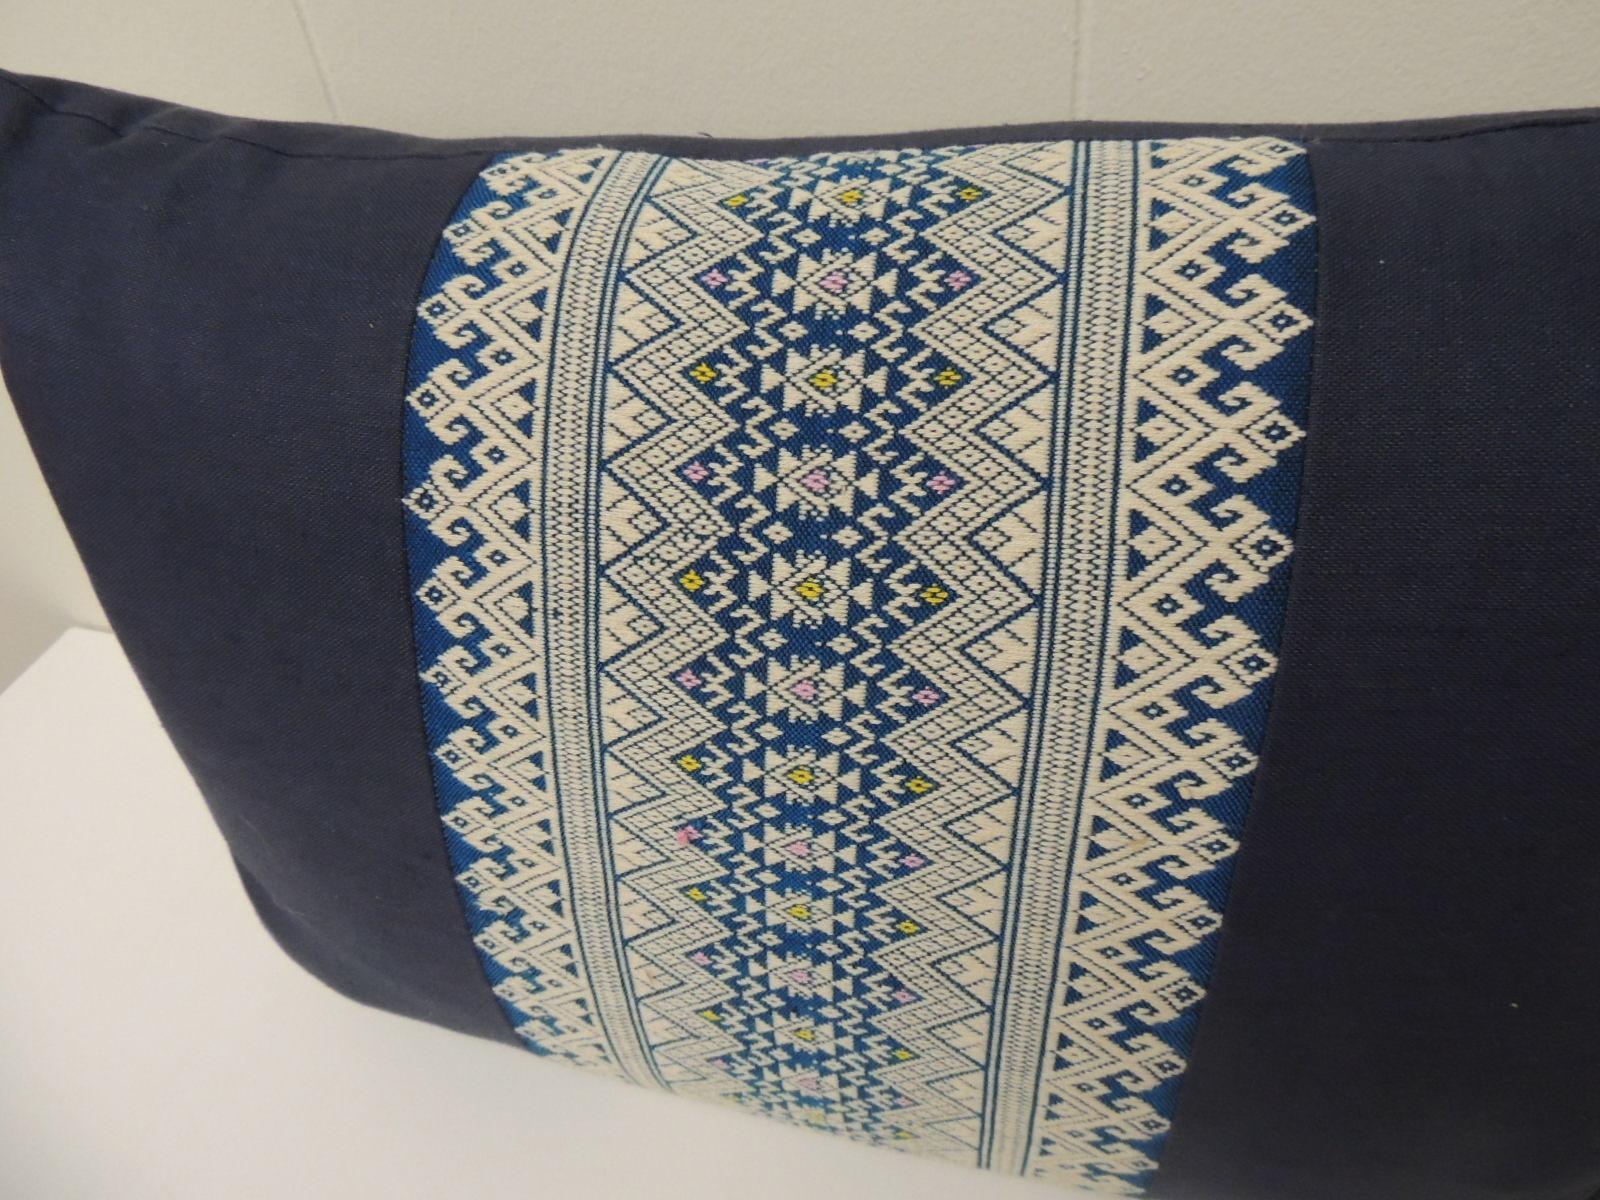 Vintage Asian embroidered decorative bolster pillow, Pillow with an intricate woven silk-on-silk centered trim framed with royal blue textured linen. The same textured royal blue linen in the front was used to finish the back of the accent pillow.